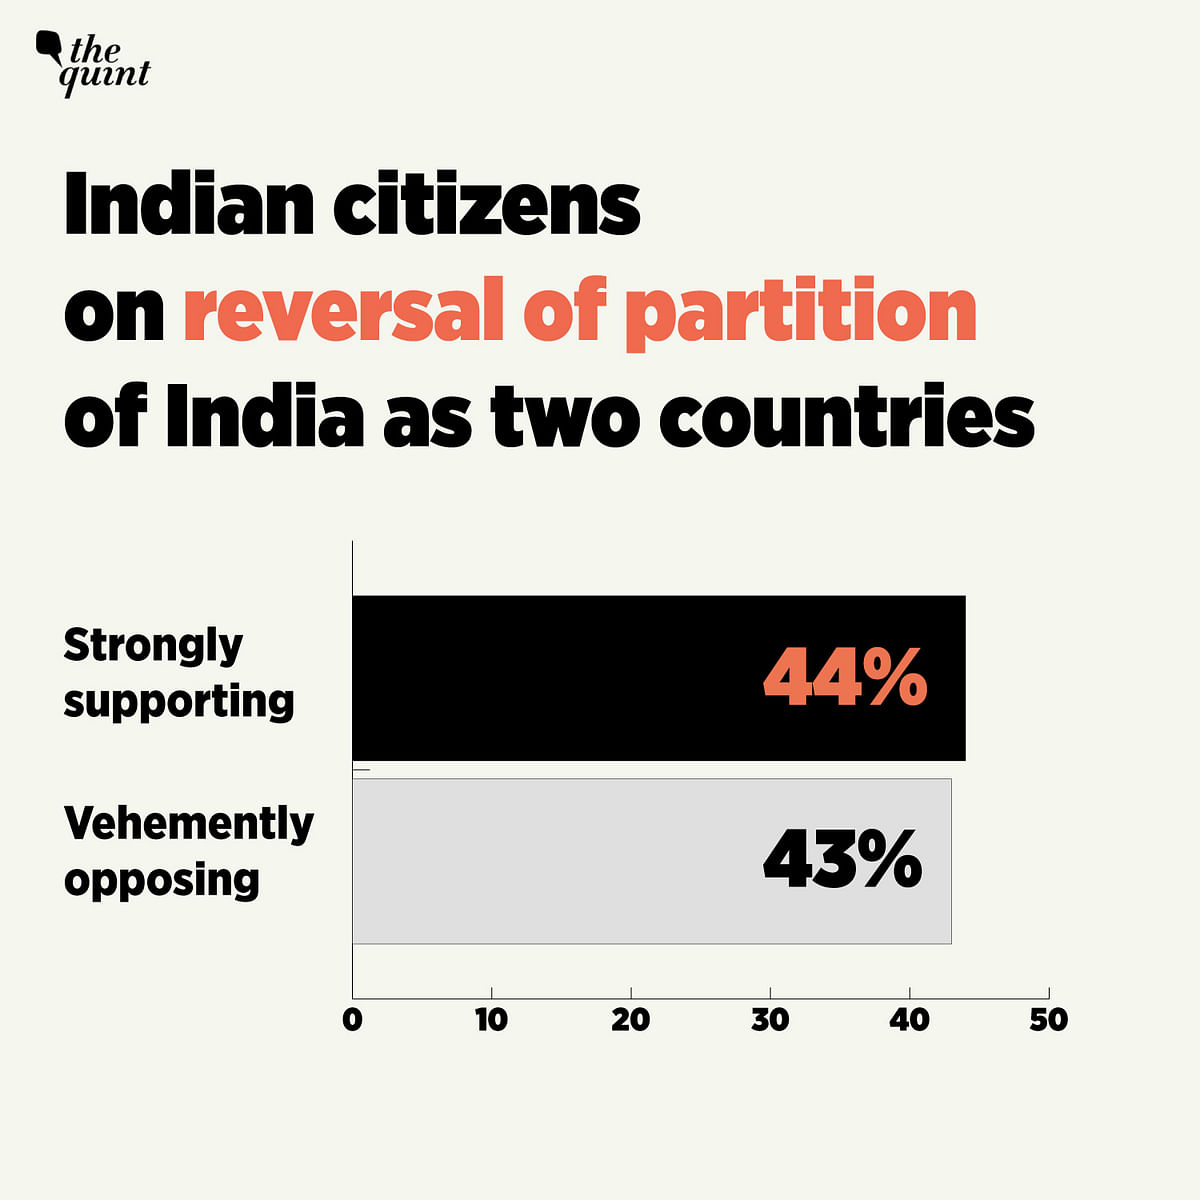 There is a yawning gap between Pakistan & Bangladesh based on the levels of trust Indians display for both nations.